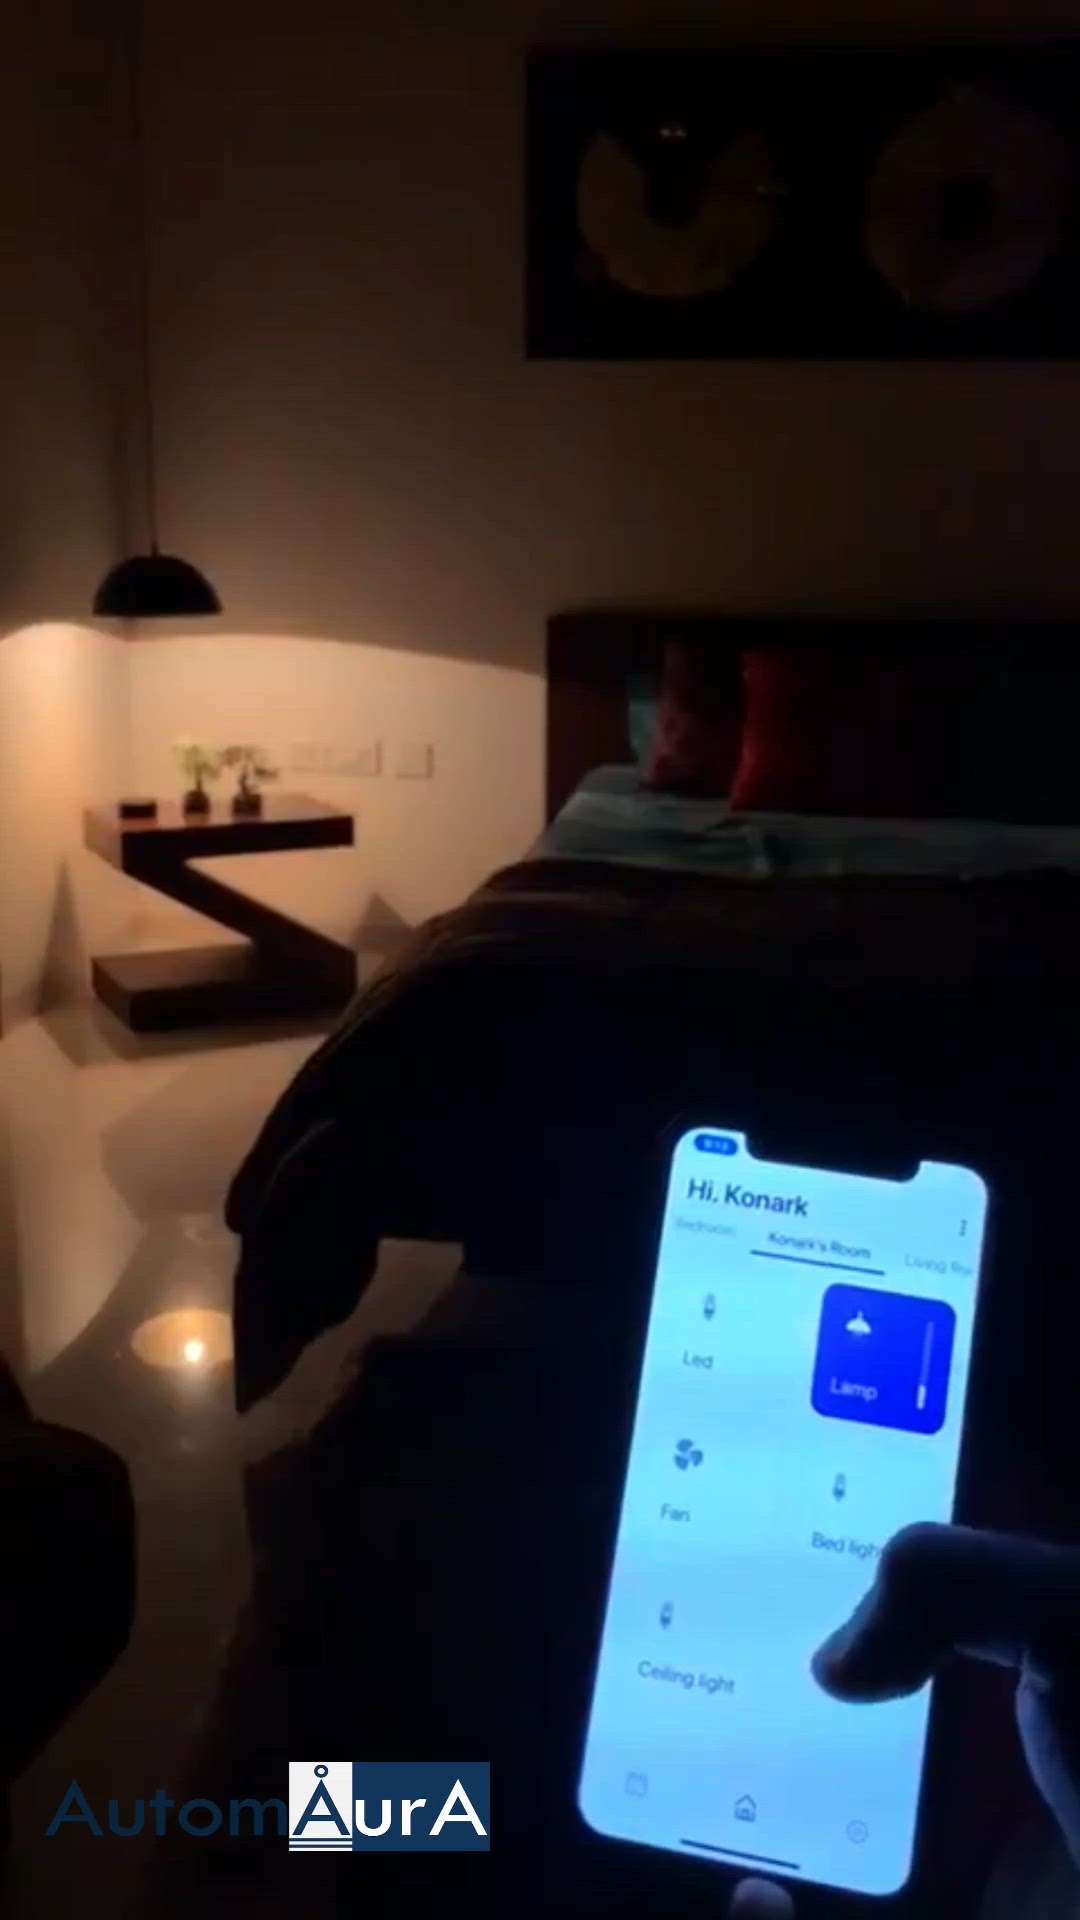 Bedroom automation